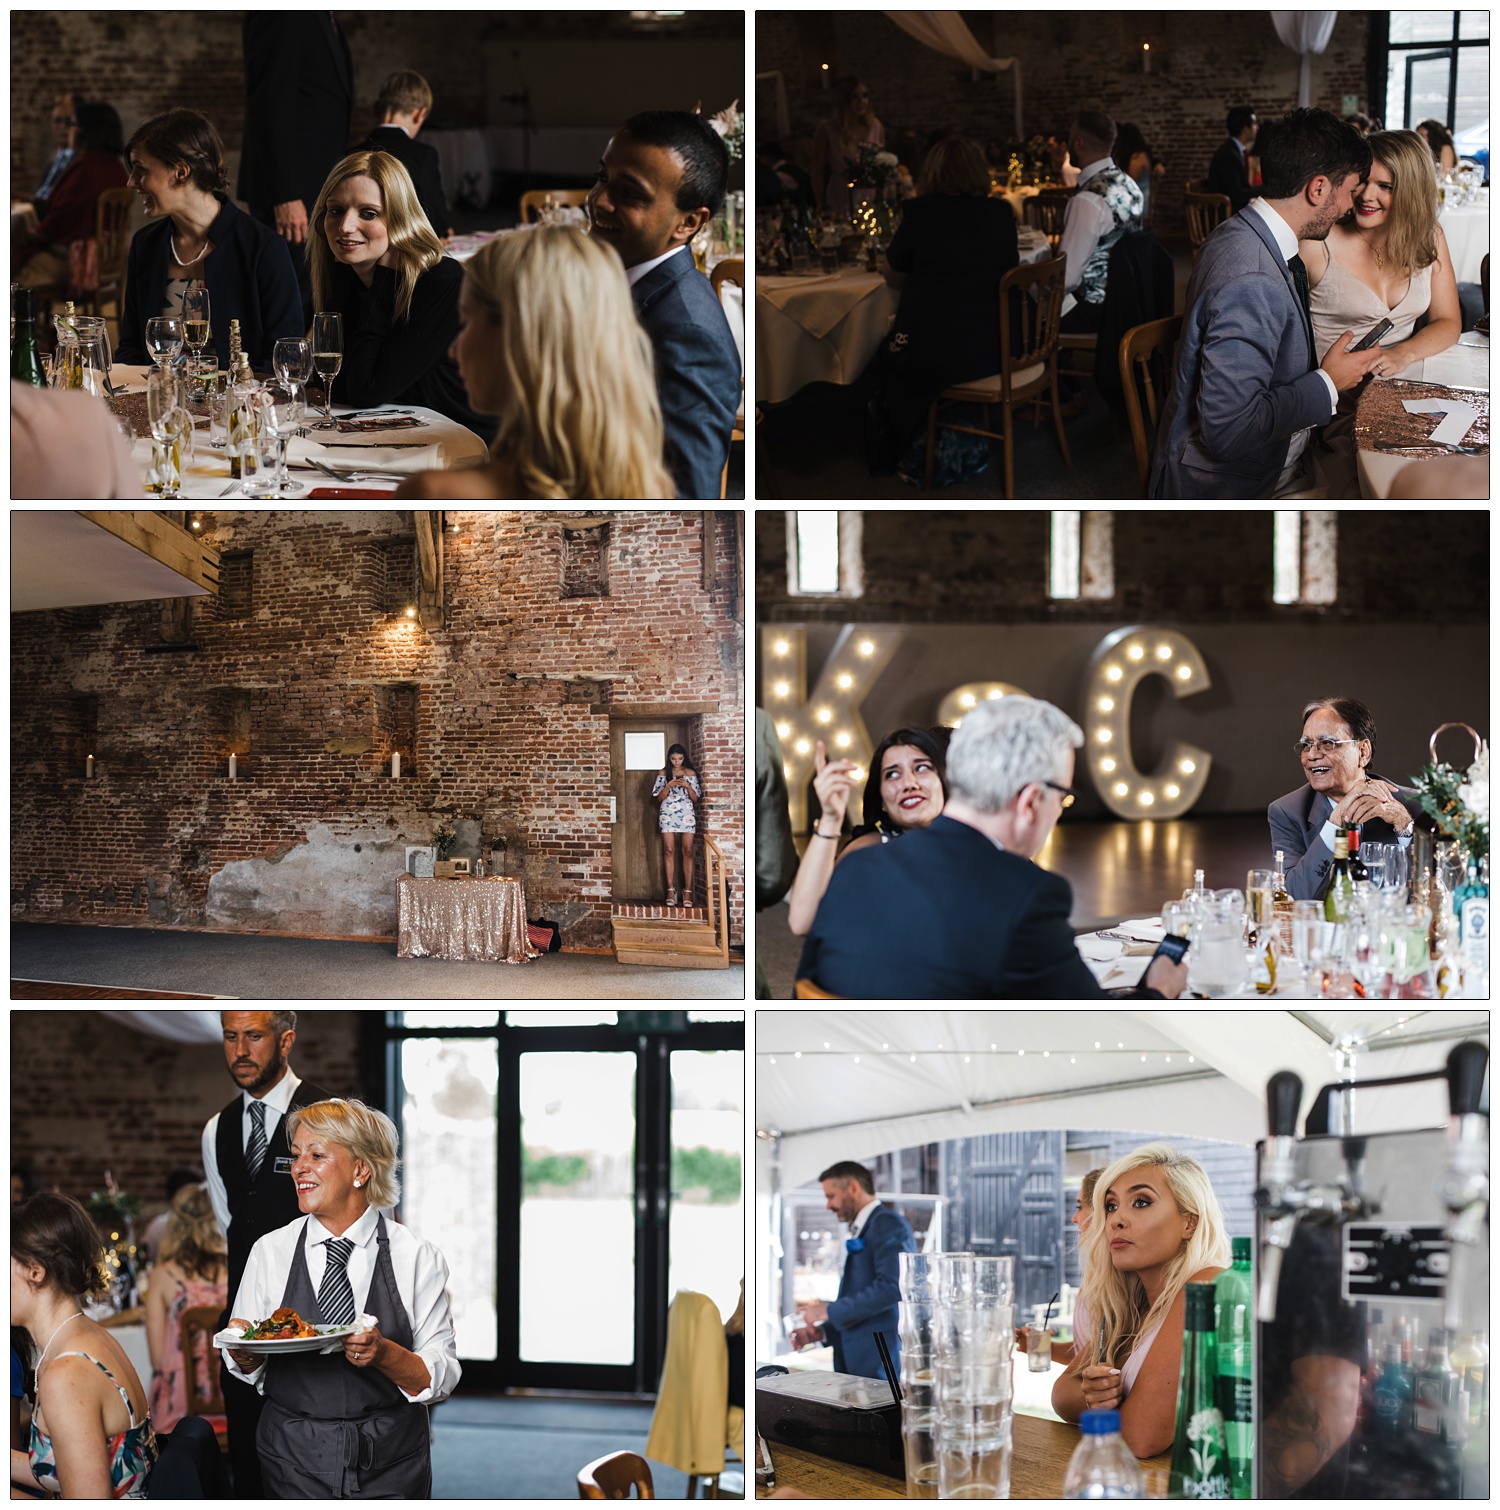 Candid moments from the wedding breakfast in a grade 1 brick and tile barn in North West Essex.